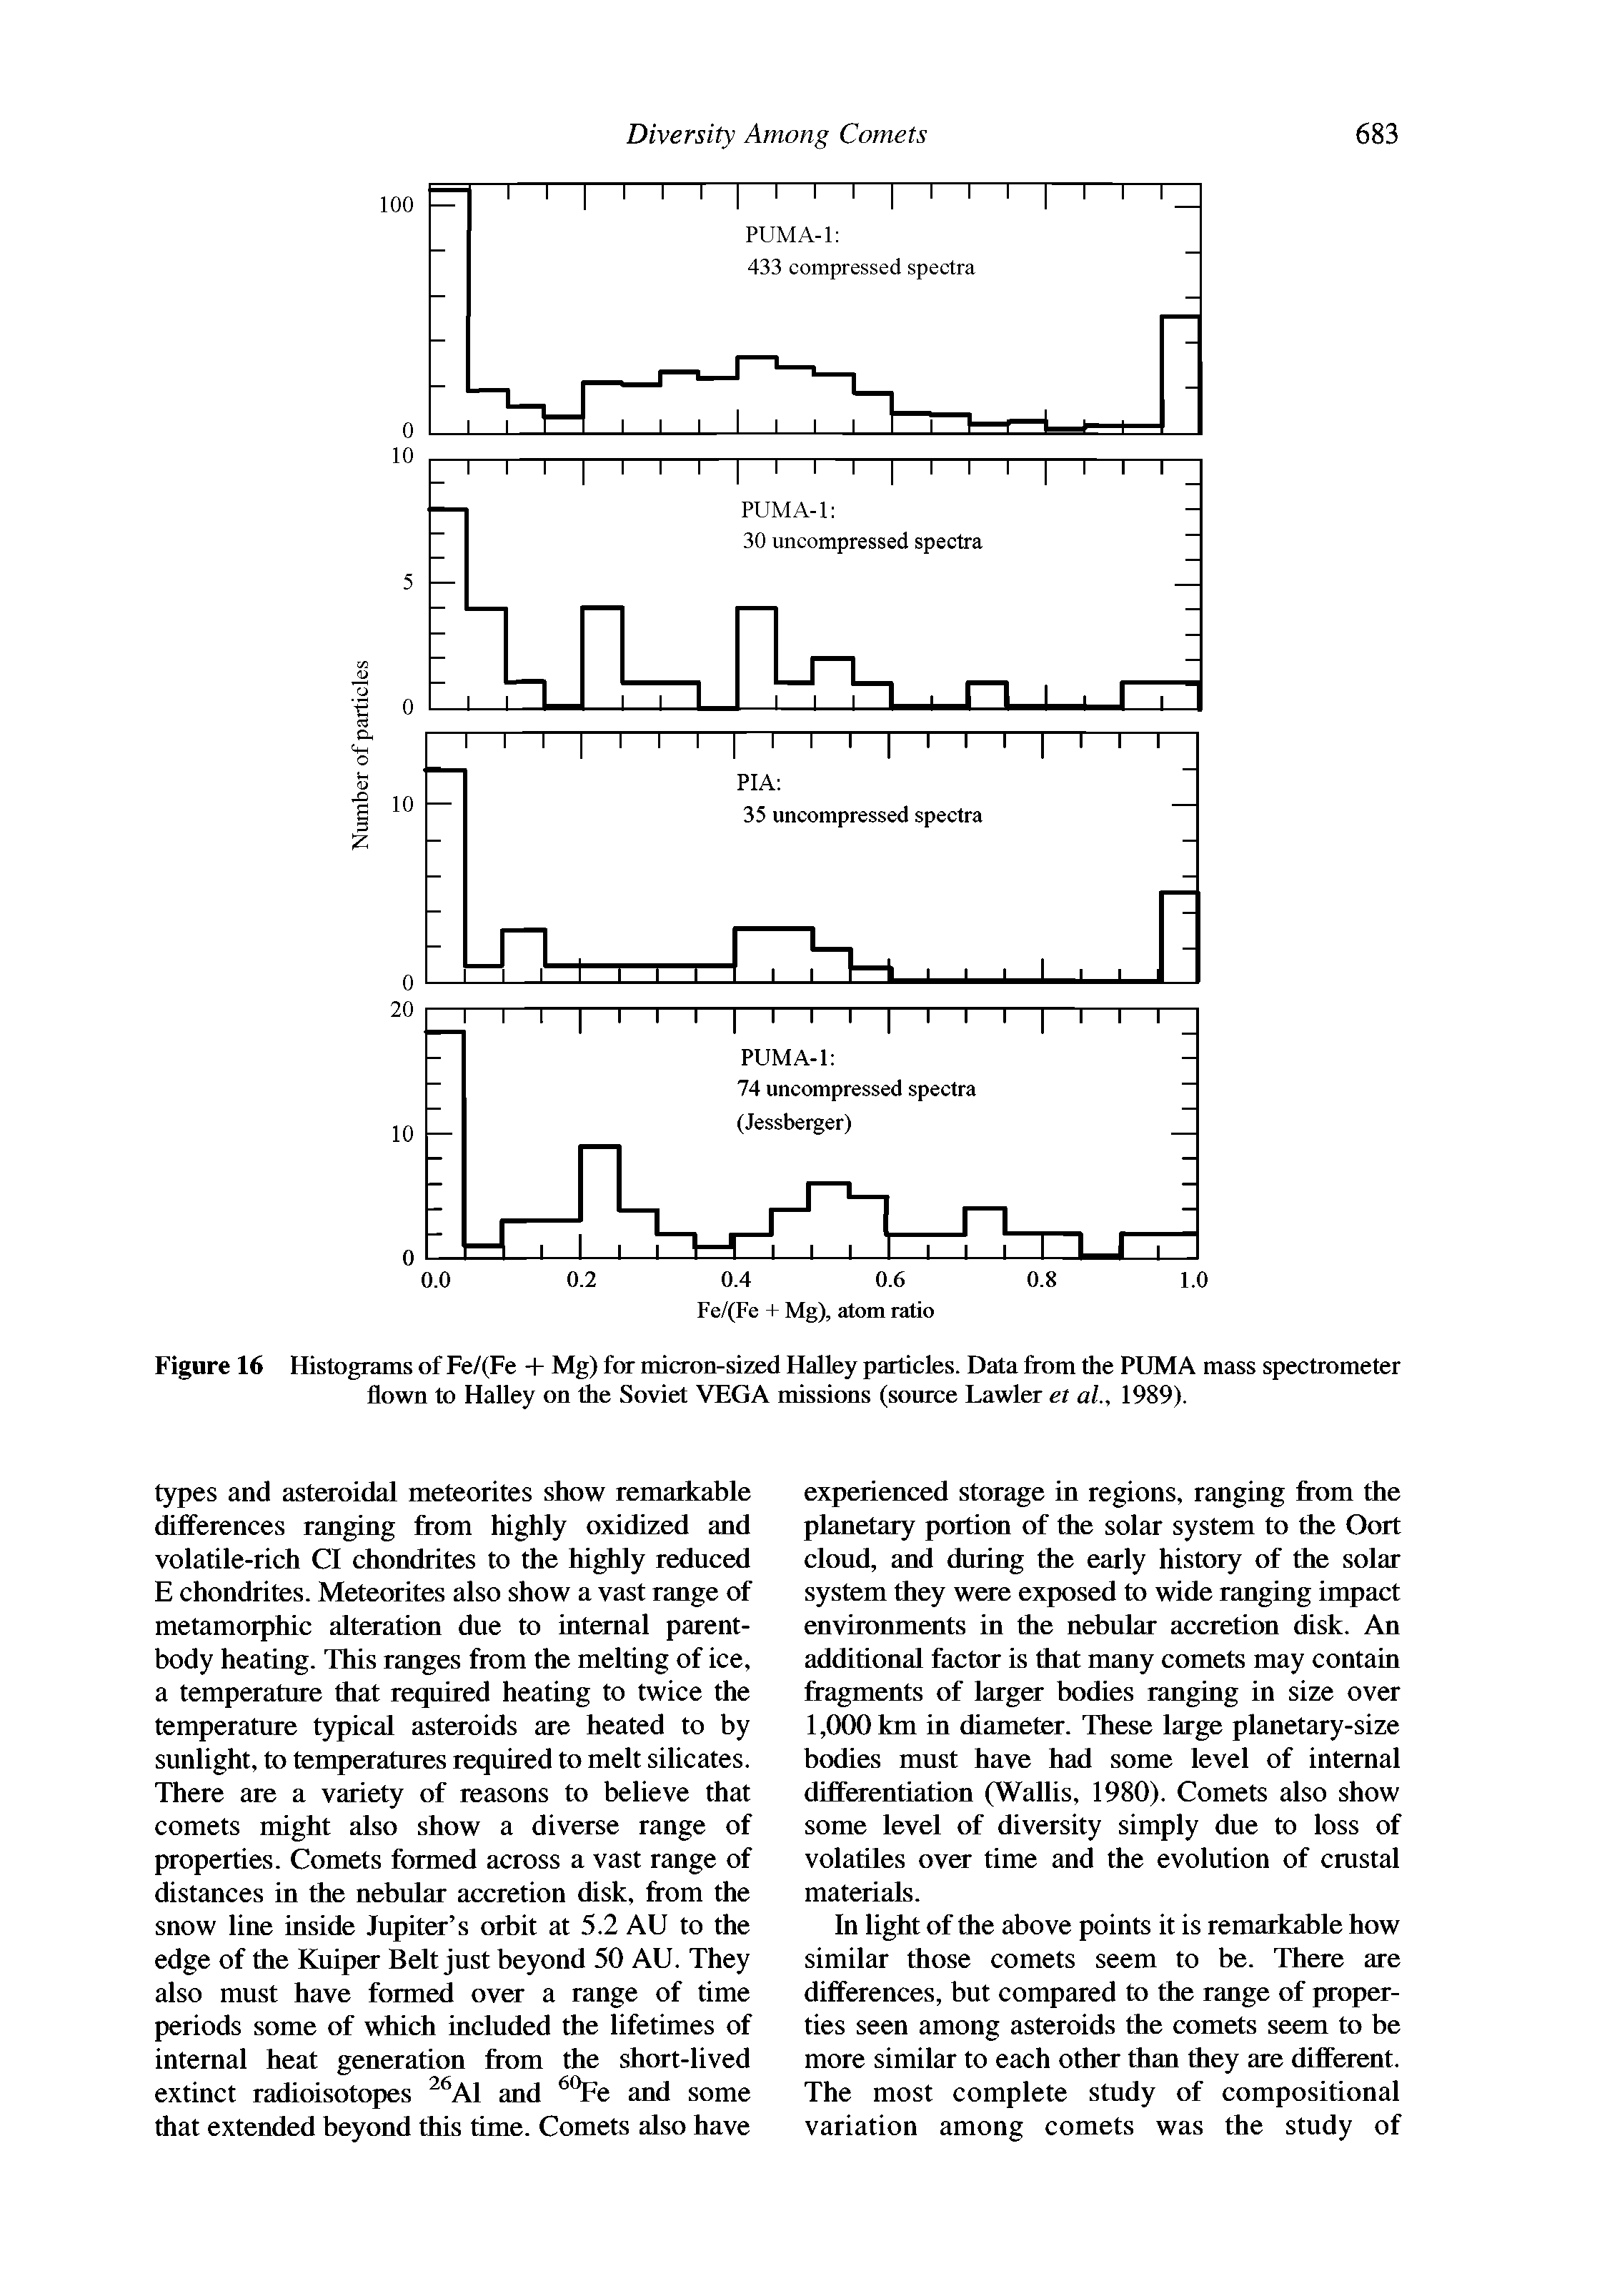 Figure 16 Histograms of Fe/(Fe + Mg) for micron-sized Halley particles. Data from the PUMA mass spectrometer flown to Halley on the Soviet VEGA missions (source Lawler et al., 1989).